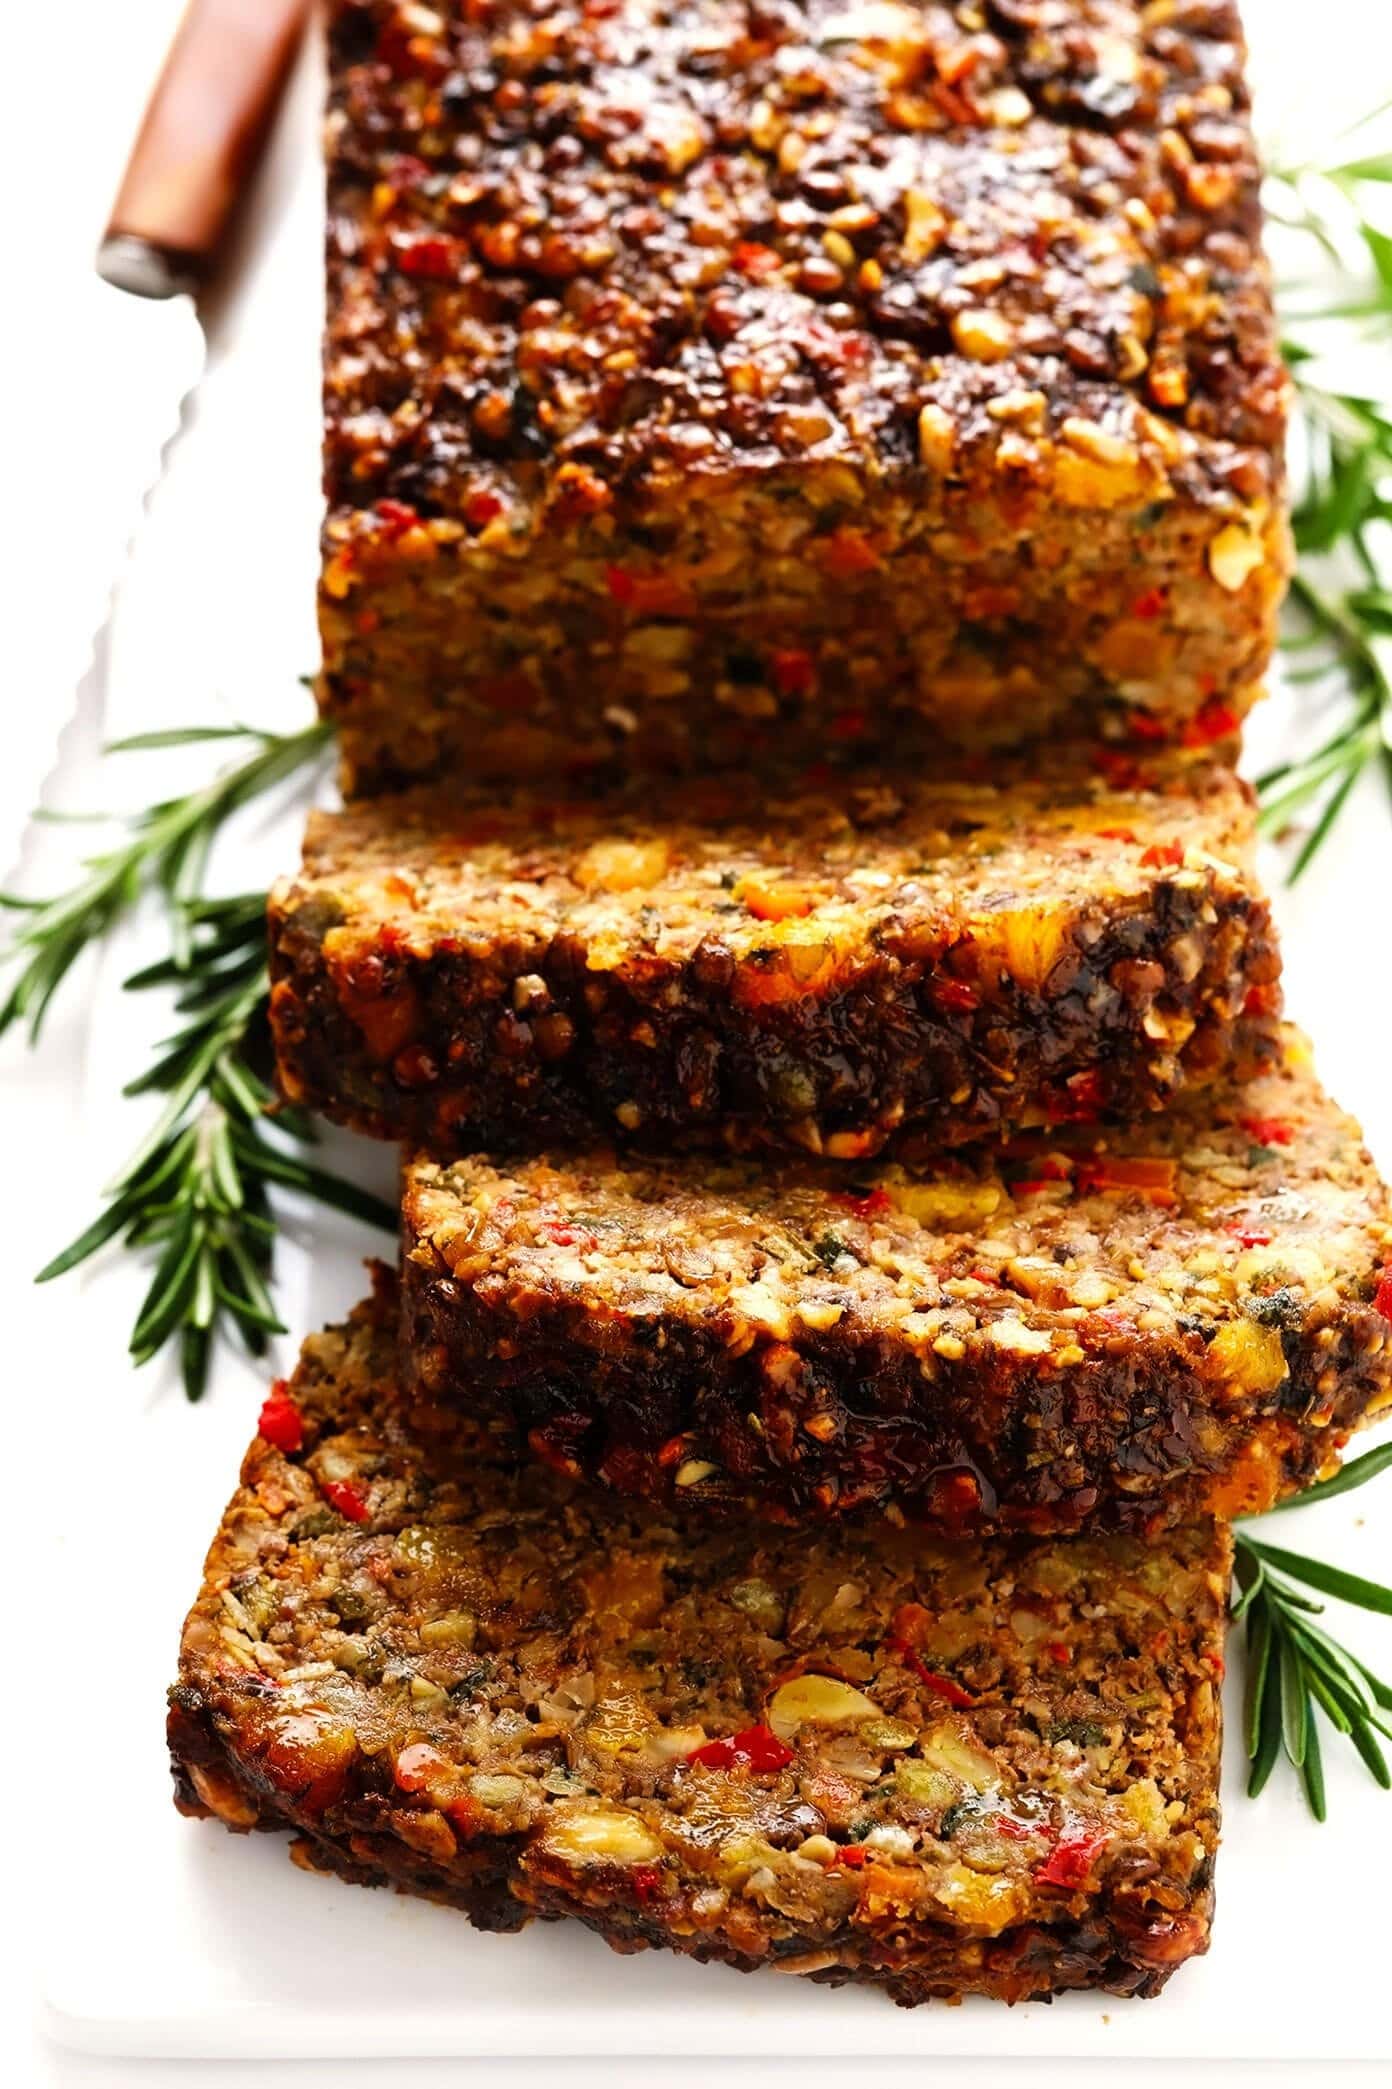 Sliced nut roast loaf made with chopped nuts, veggies and lots of herbs.